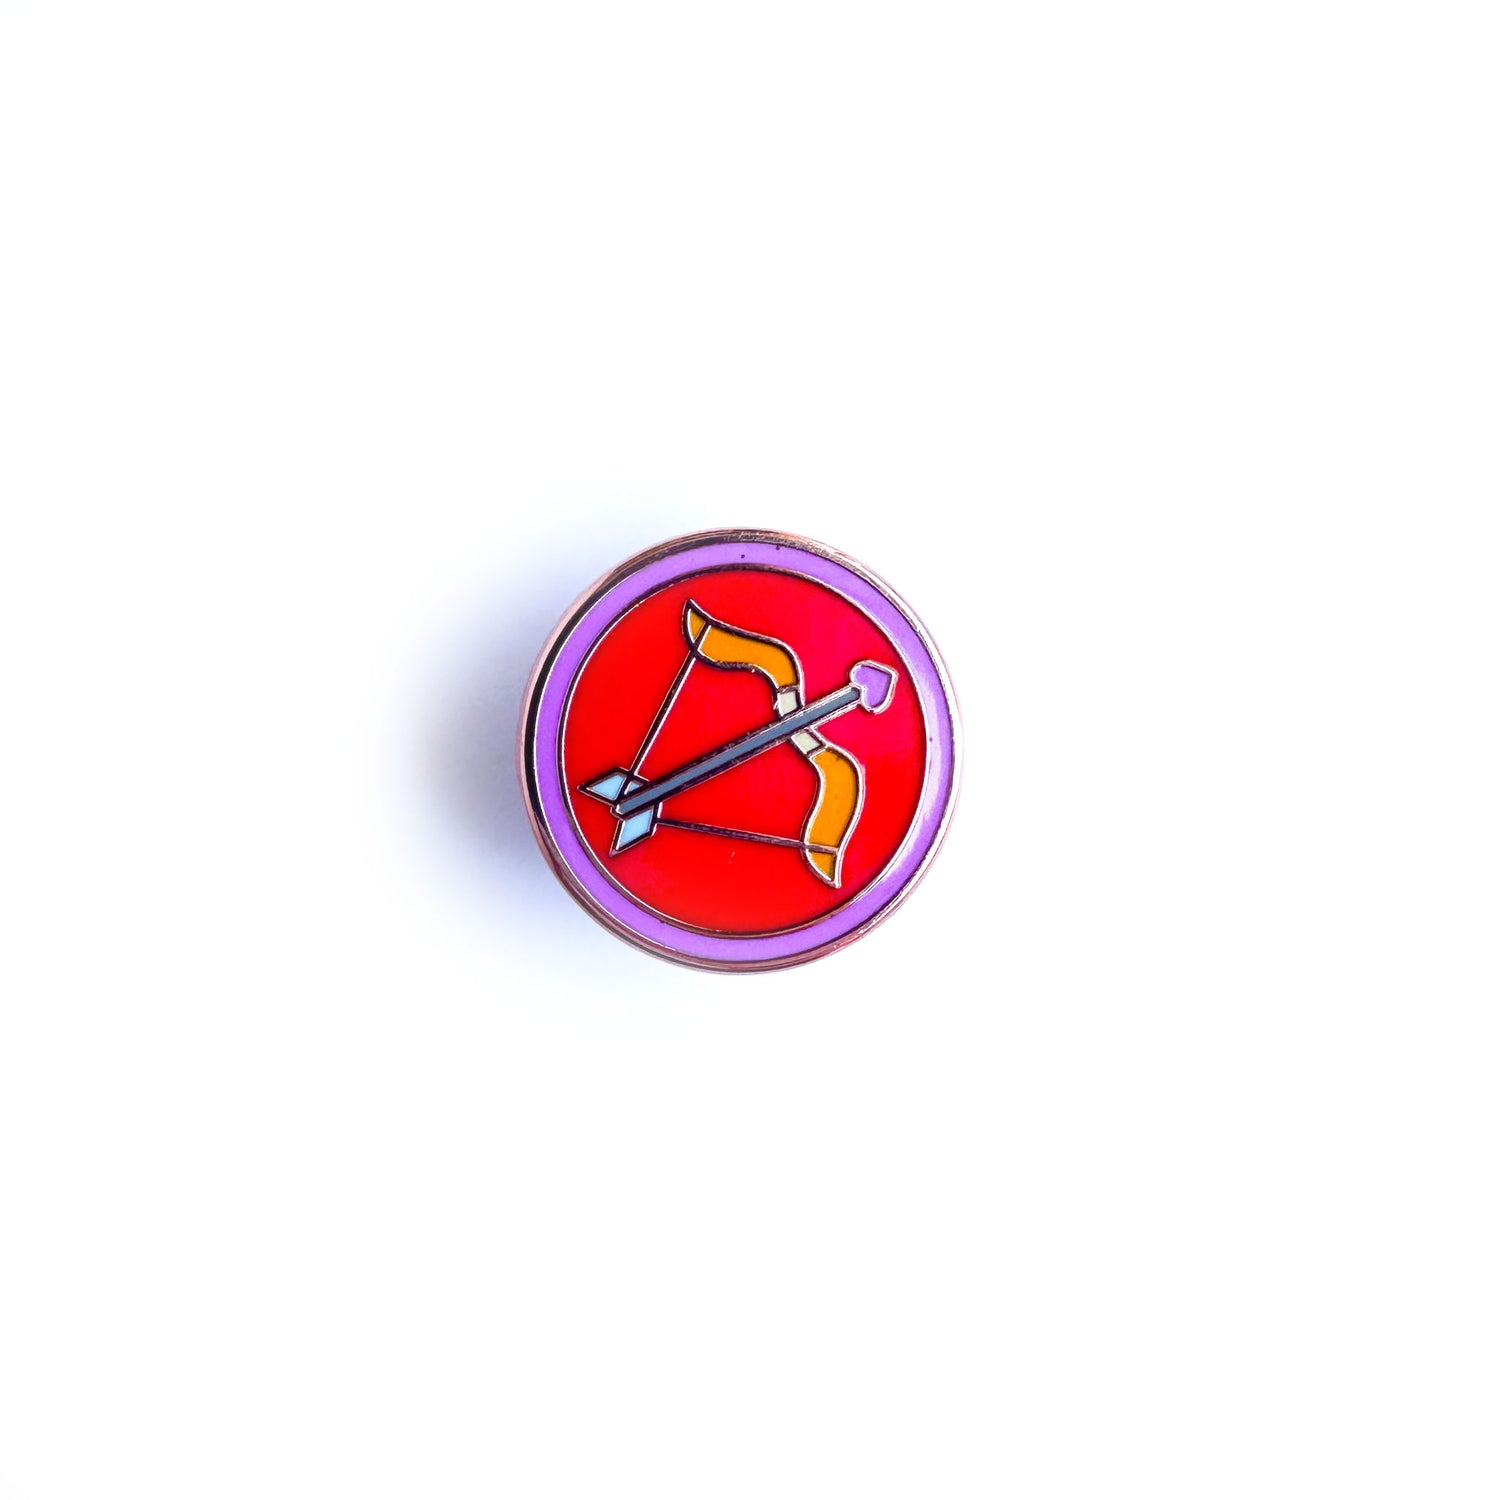 A pin of a red circle with a pink boarder with a bow and arrow in the center of the red circle to represent the Sagittarius zodiac sign. The arrow has a heart for an arrow head.